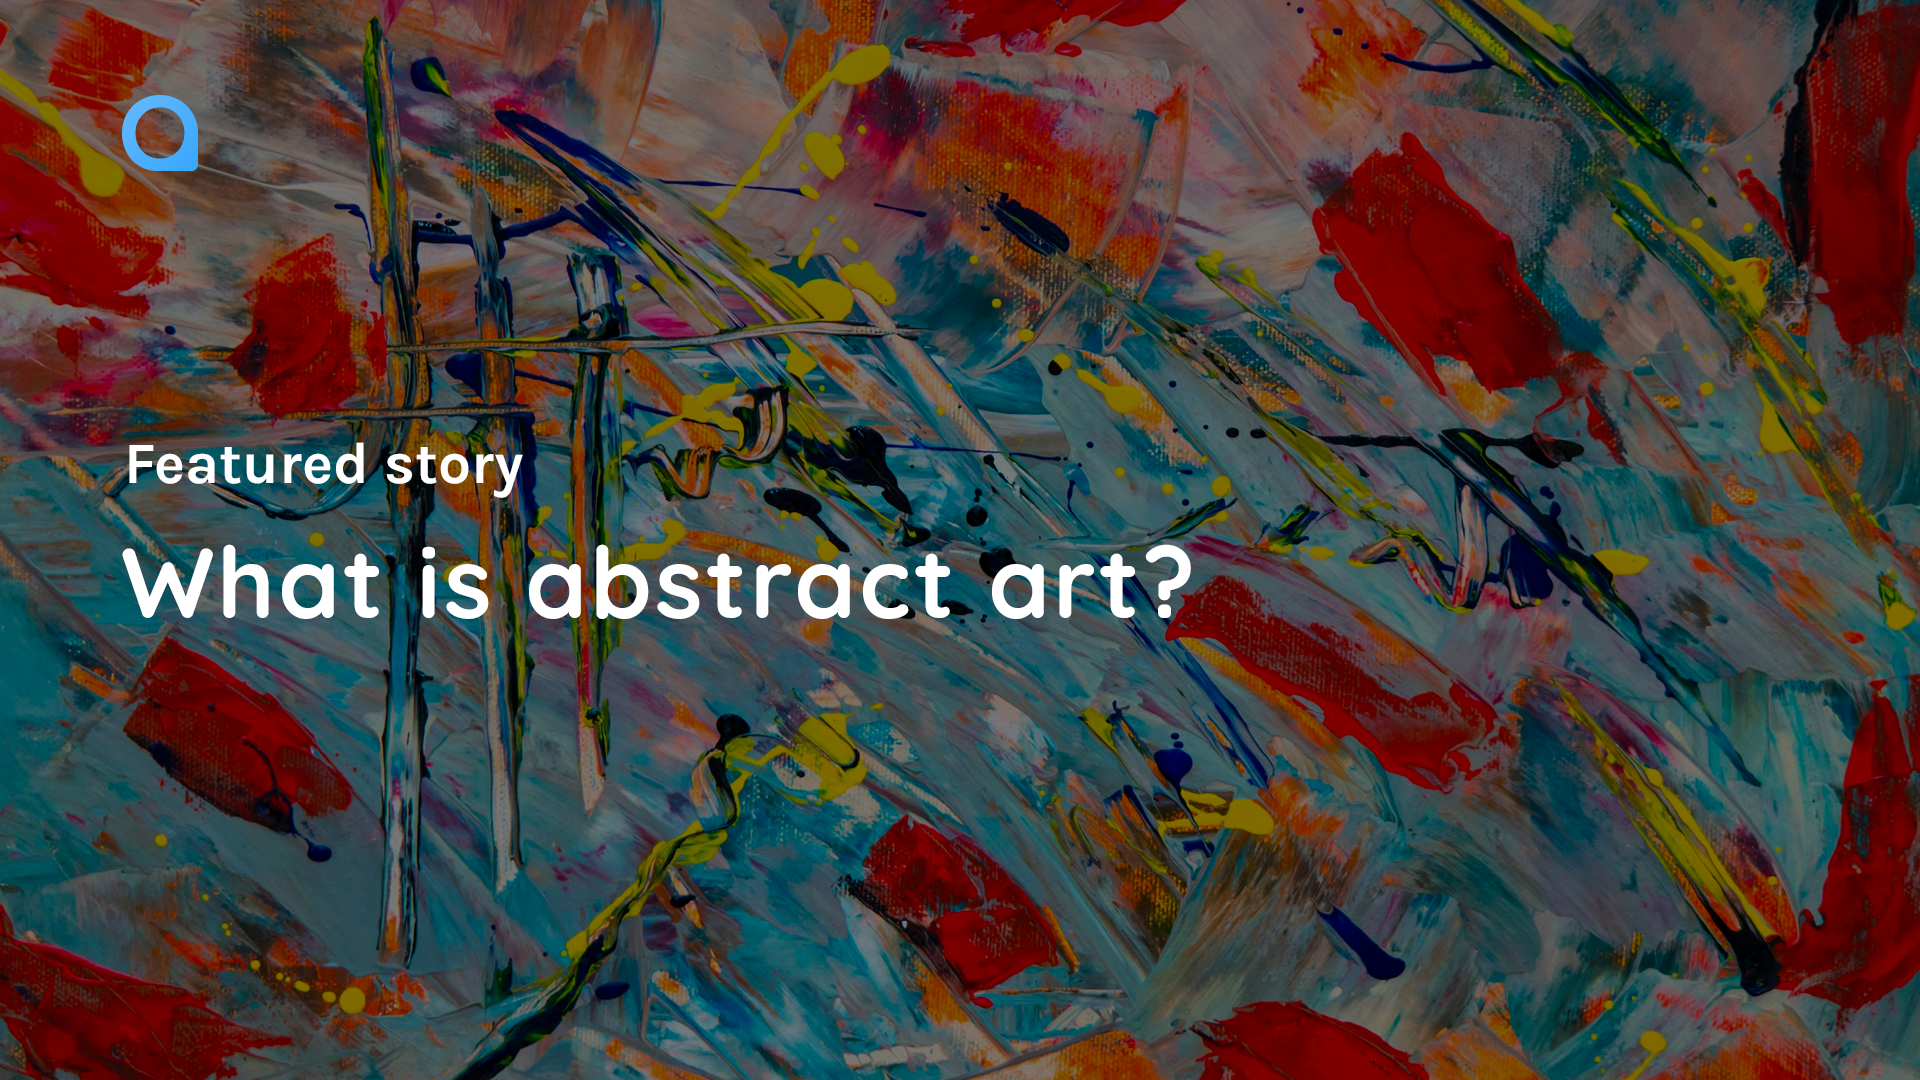 What is abstract art?